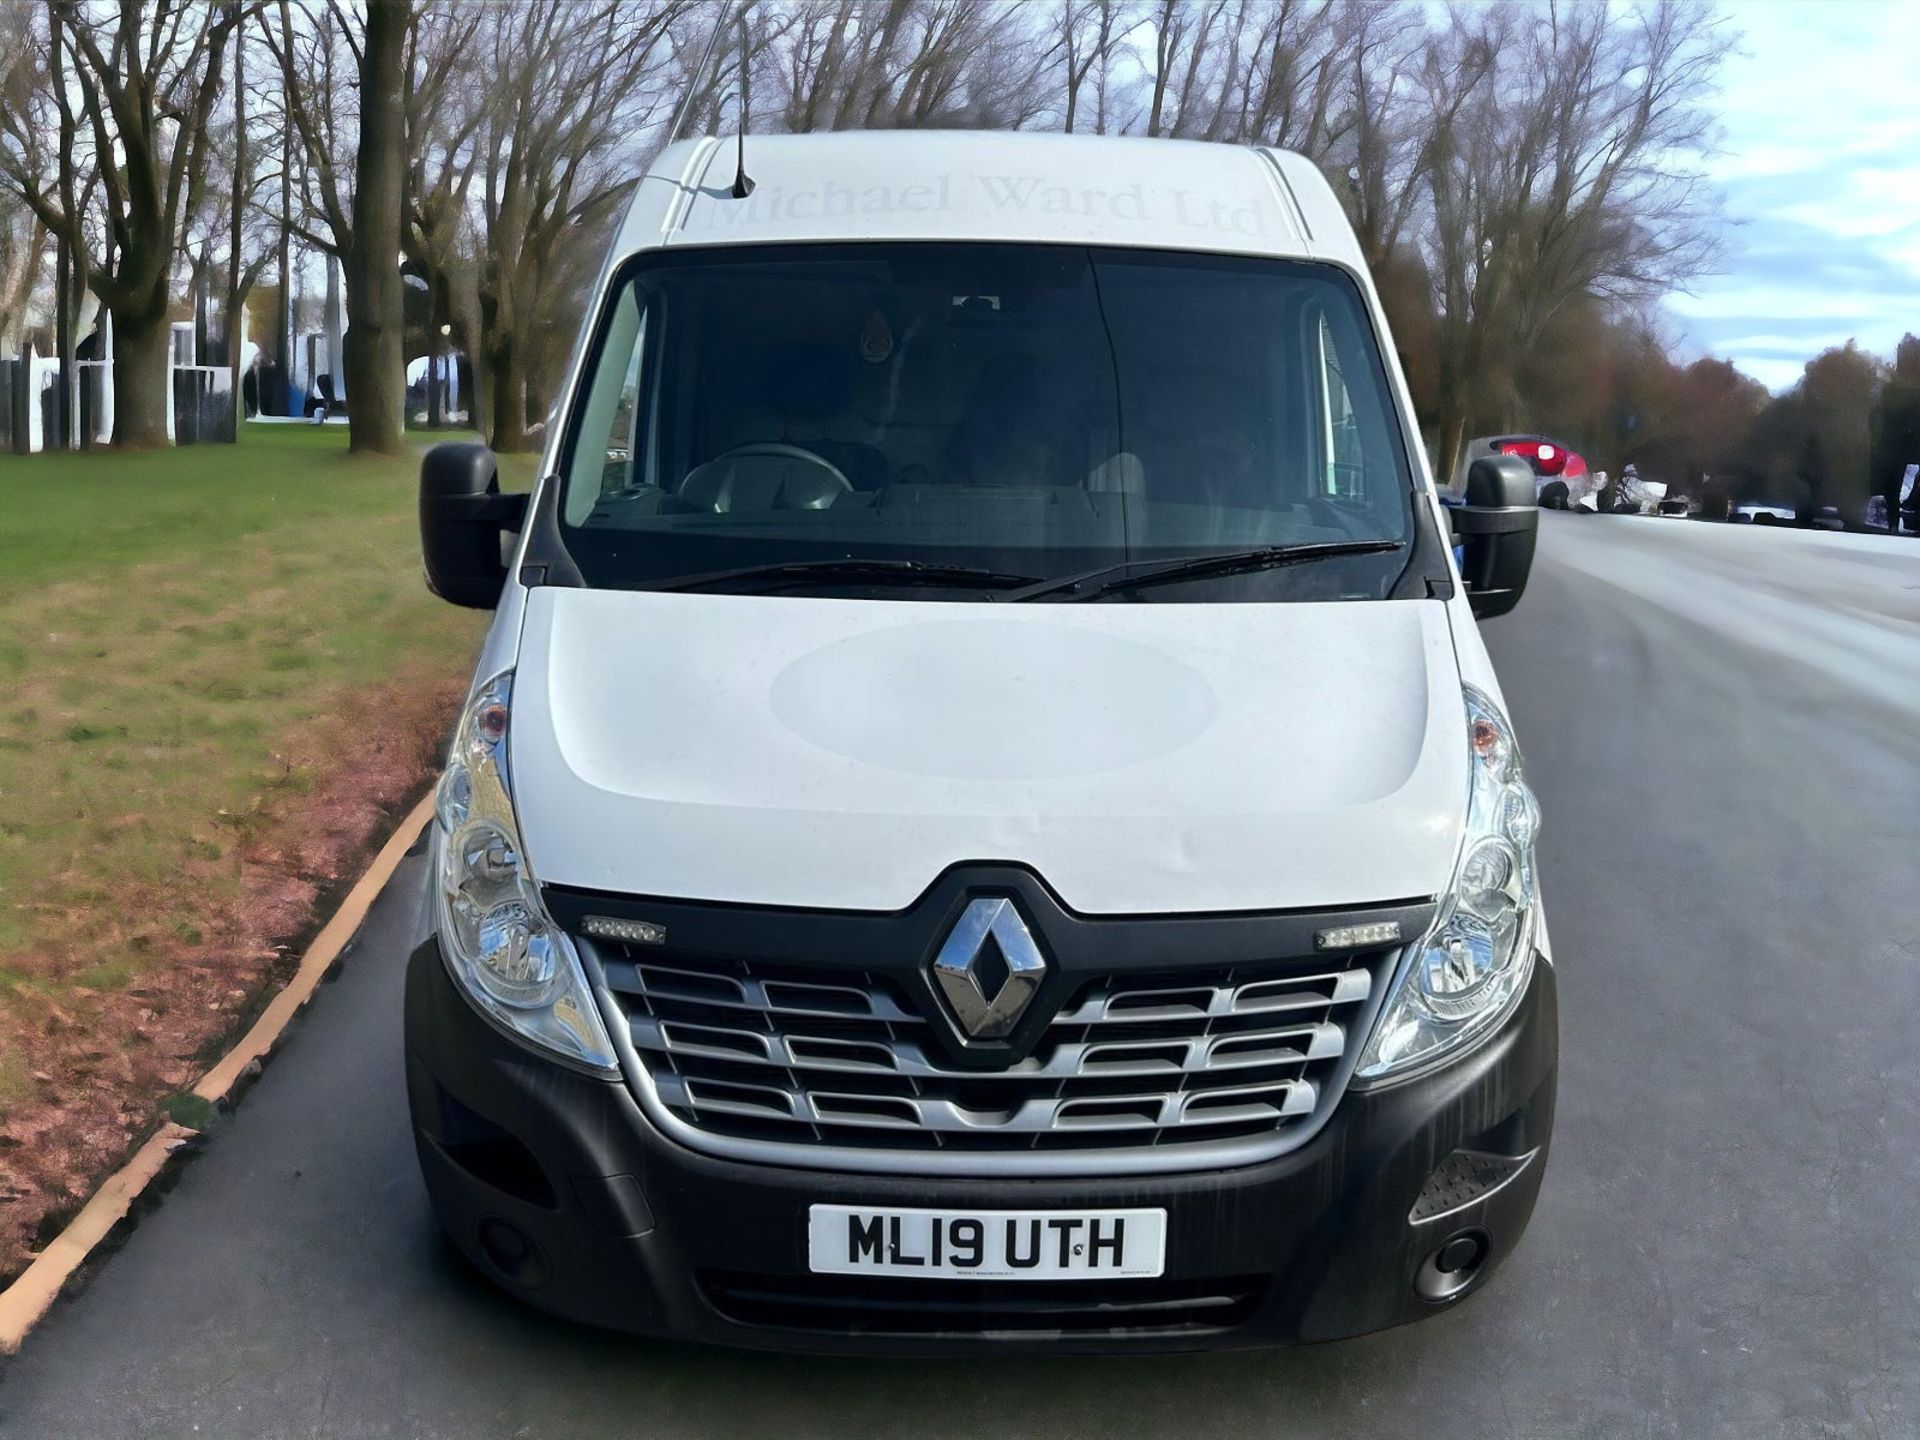 2019-19 REG RENAULT MASTER DCI MWB35 L2H2 -HPI CLEAR - READY FOR WORK! - Image 3 of 14